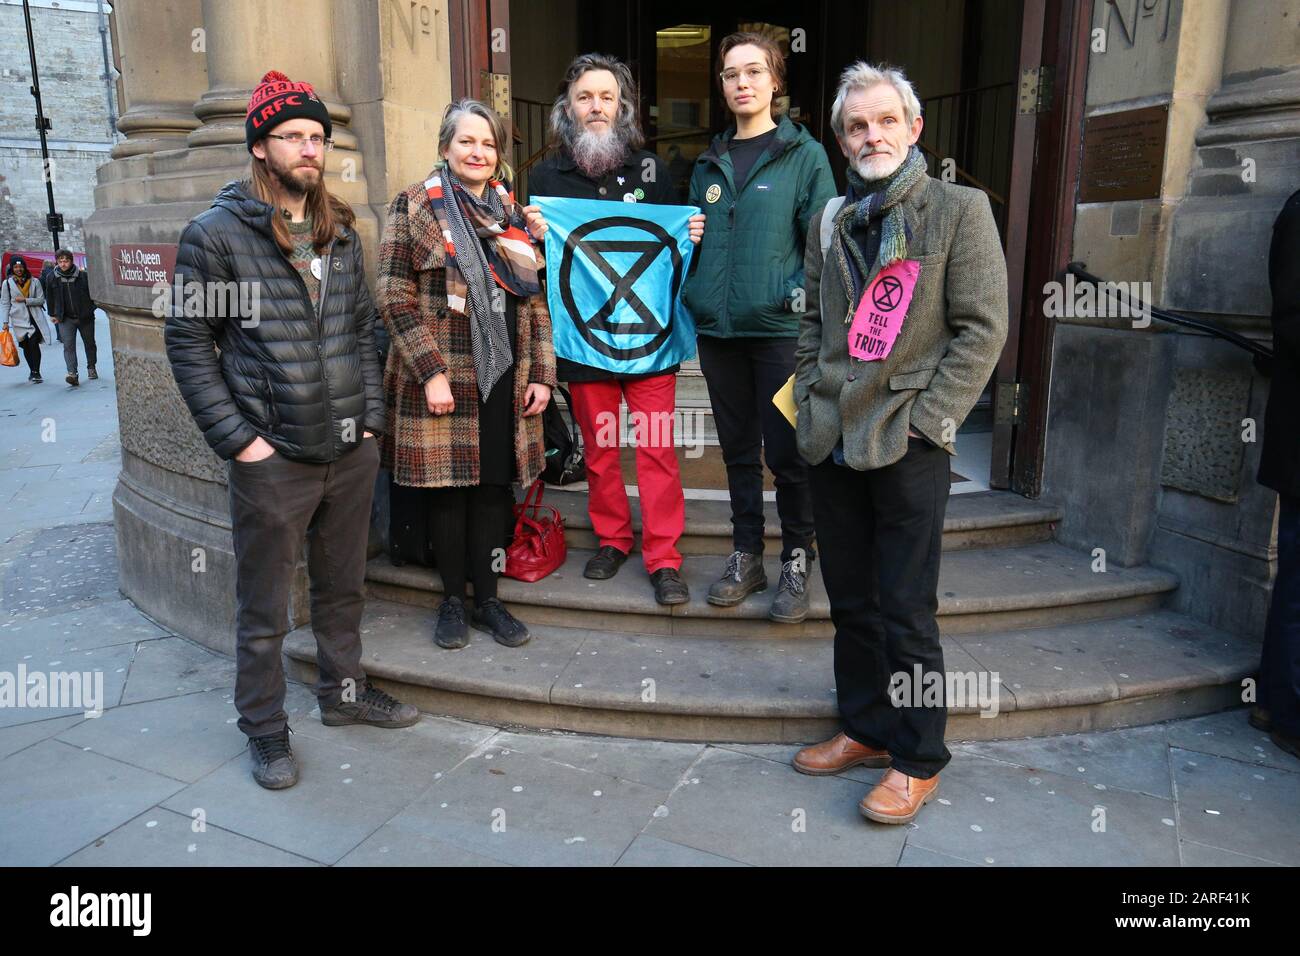 From left to right: Ben Bont (left), 42, a tree surgeon from West Wales, Claudia Fisher, 57, a business woman from Brighton, Senan Clifford, 59, a former teacher from Gloucestershire, Phoebe Valentine, 23, a maths student from Brighton, and David Lambert (right), 60, a historian from Gloucestershire, arrive at the City of London Magistrates' Court, after they were arrested on 10 October 2019, during a peaceful demonstration - in which they glued themselves to the concourse between the DLR station and City Airport in east London. Stock Photo